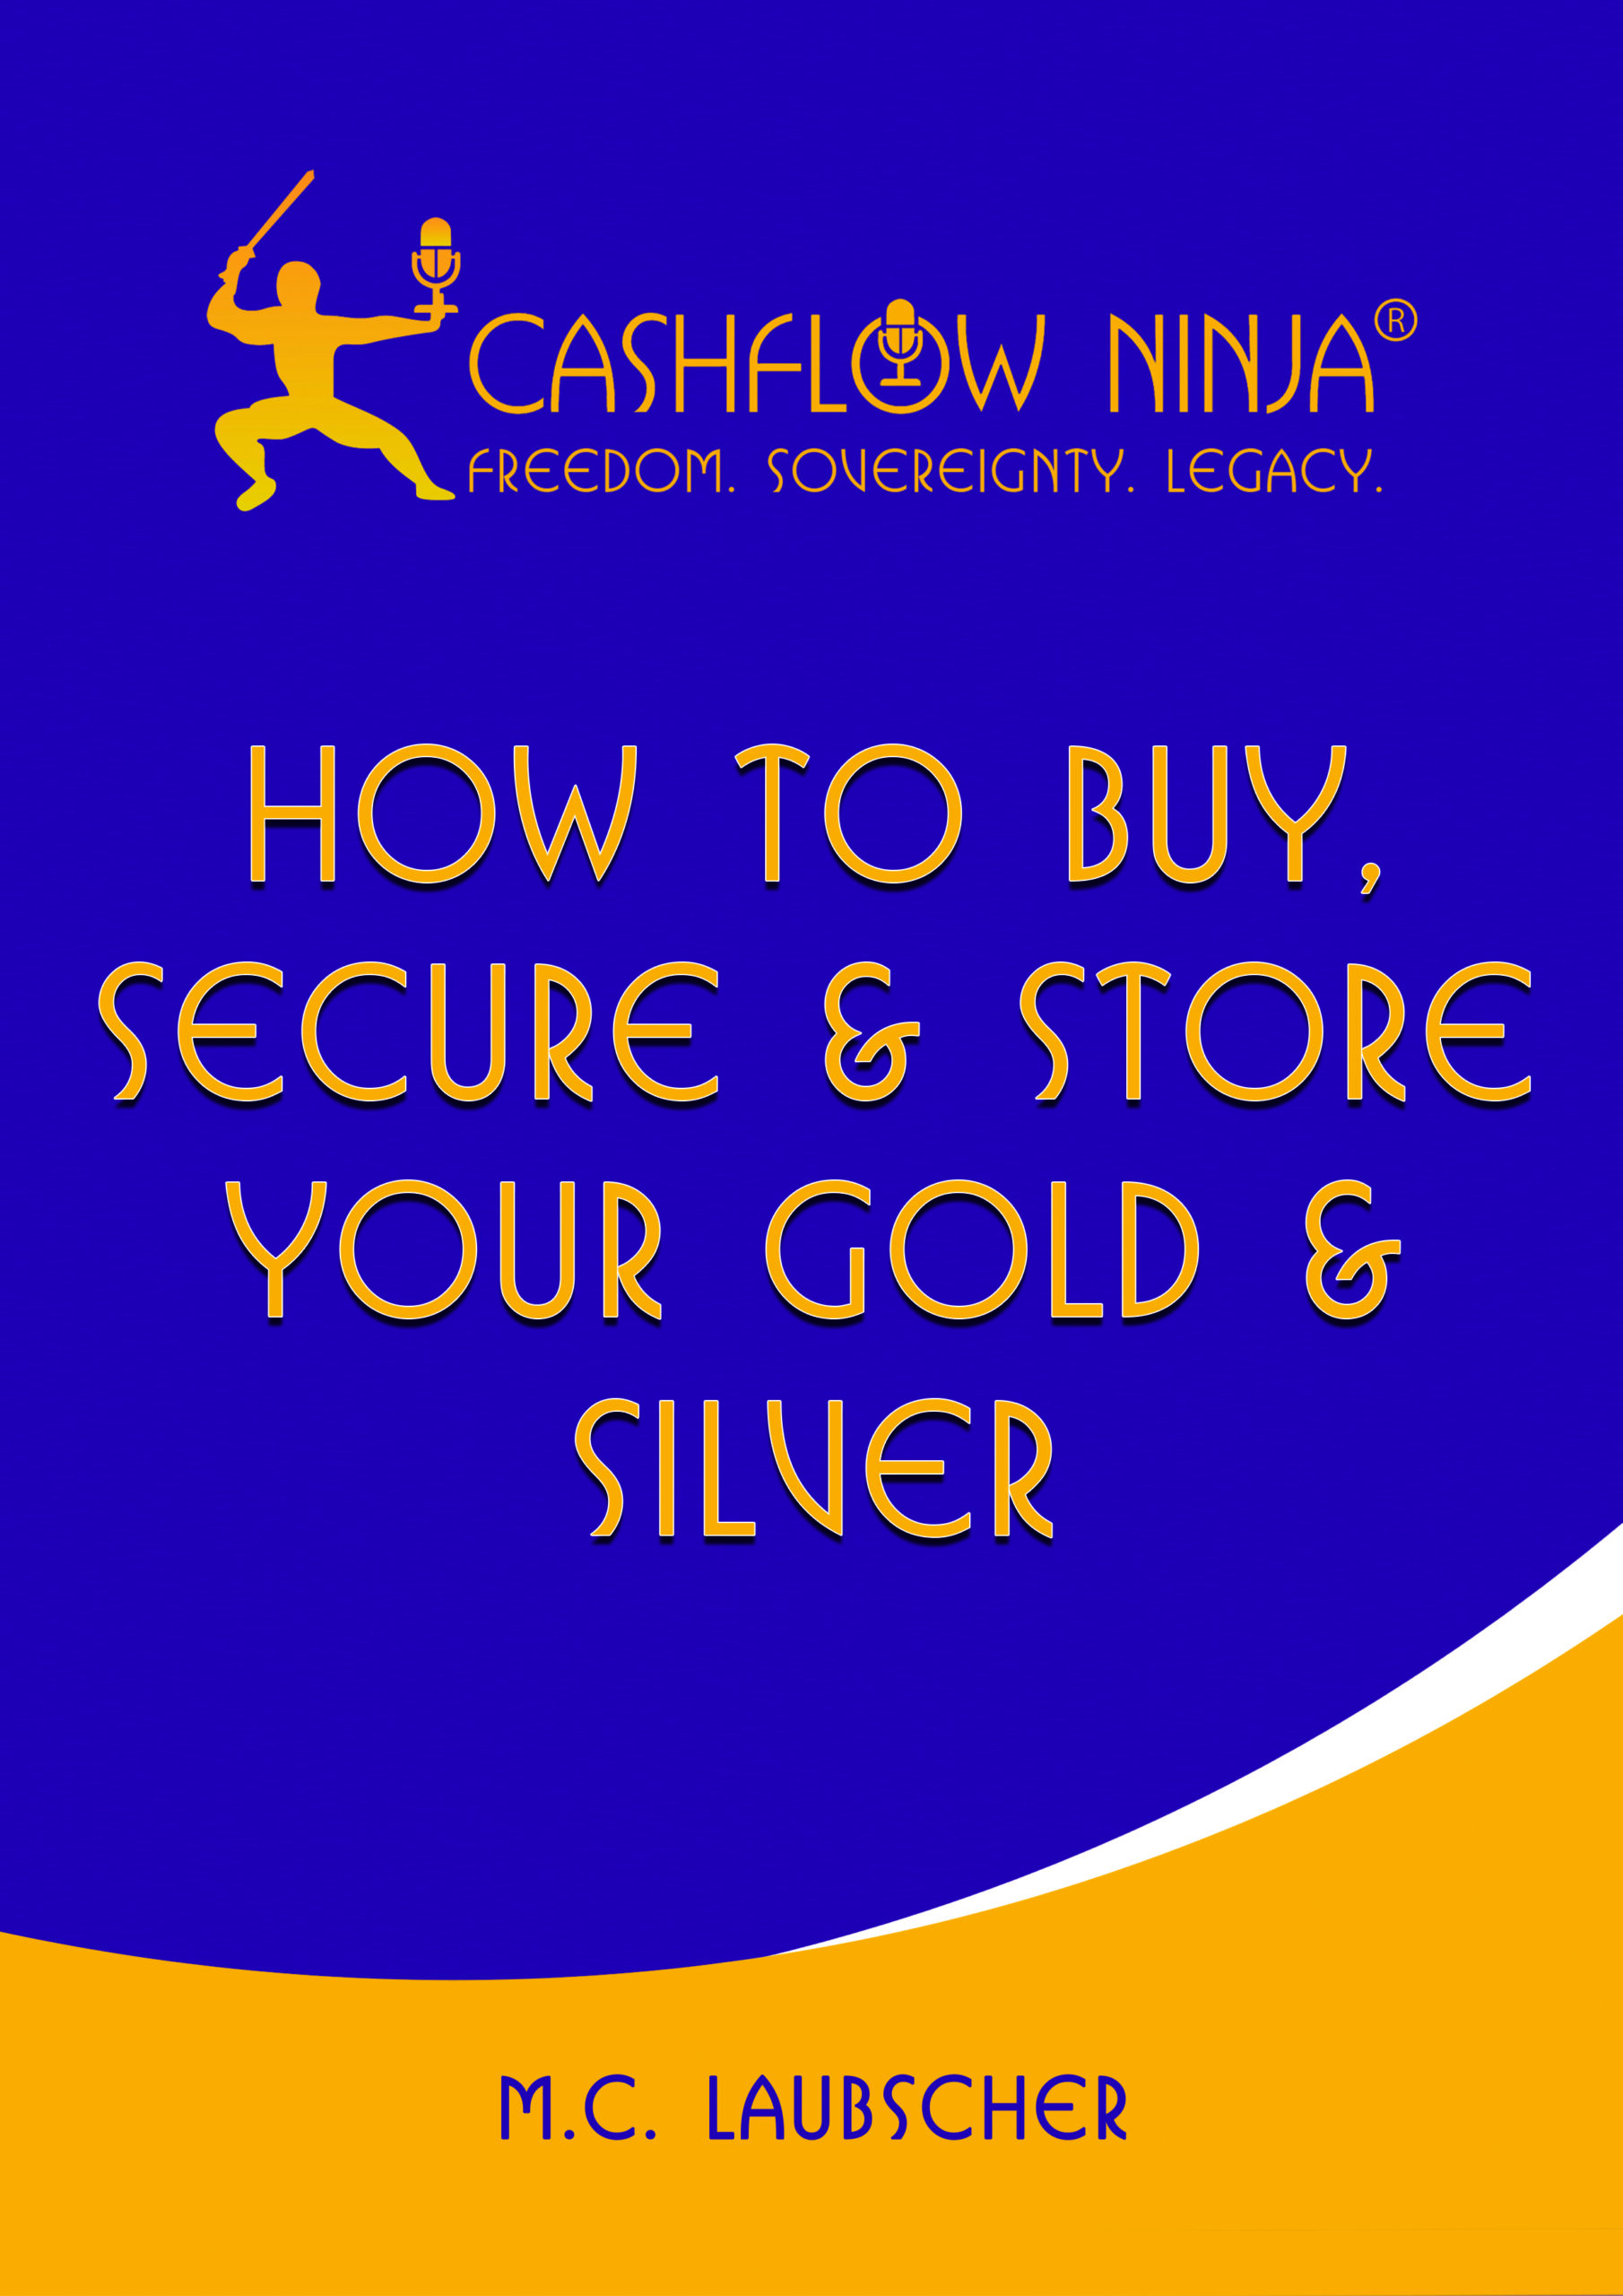 How To Buy, Secure & Store Your Gold & Silver updated